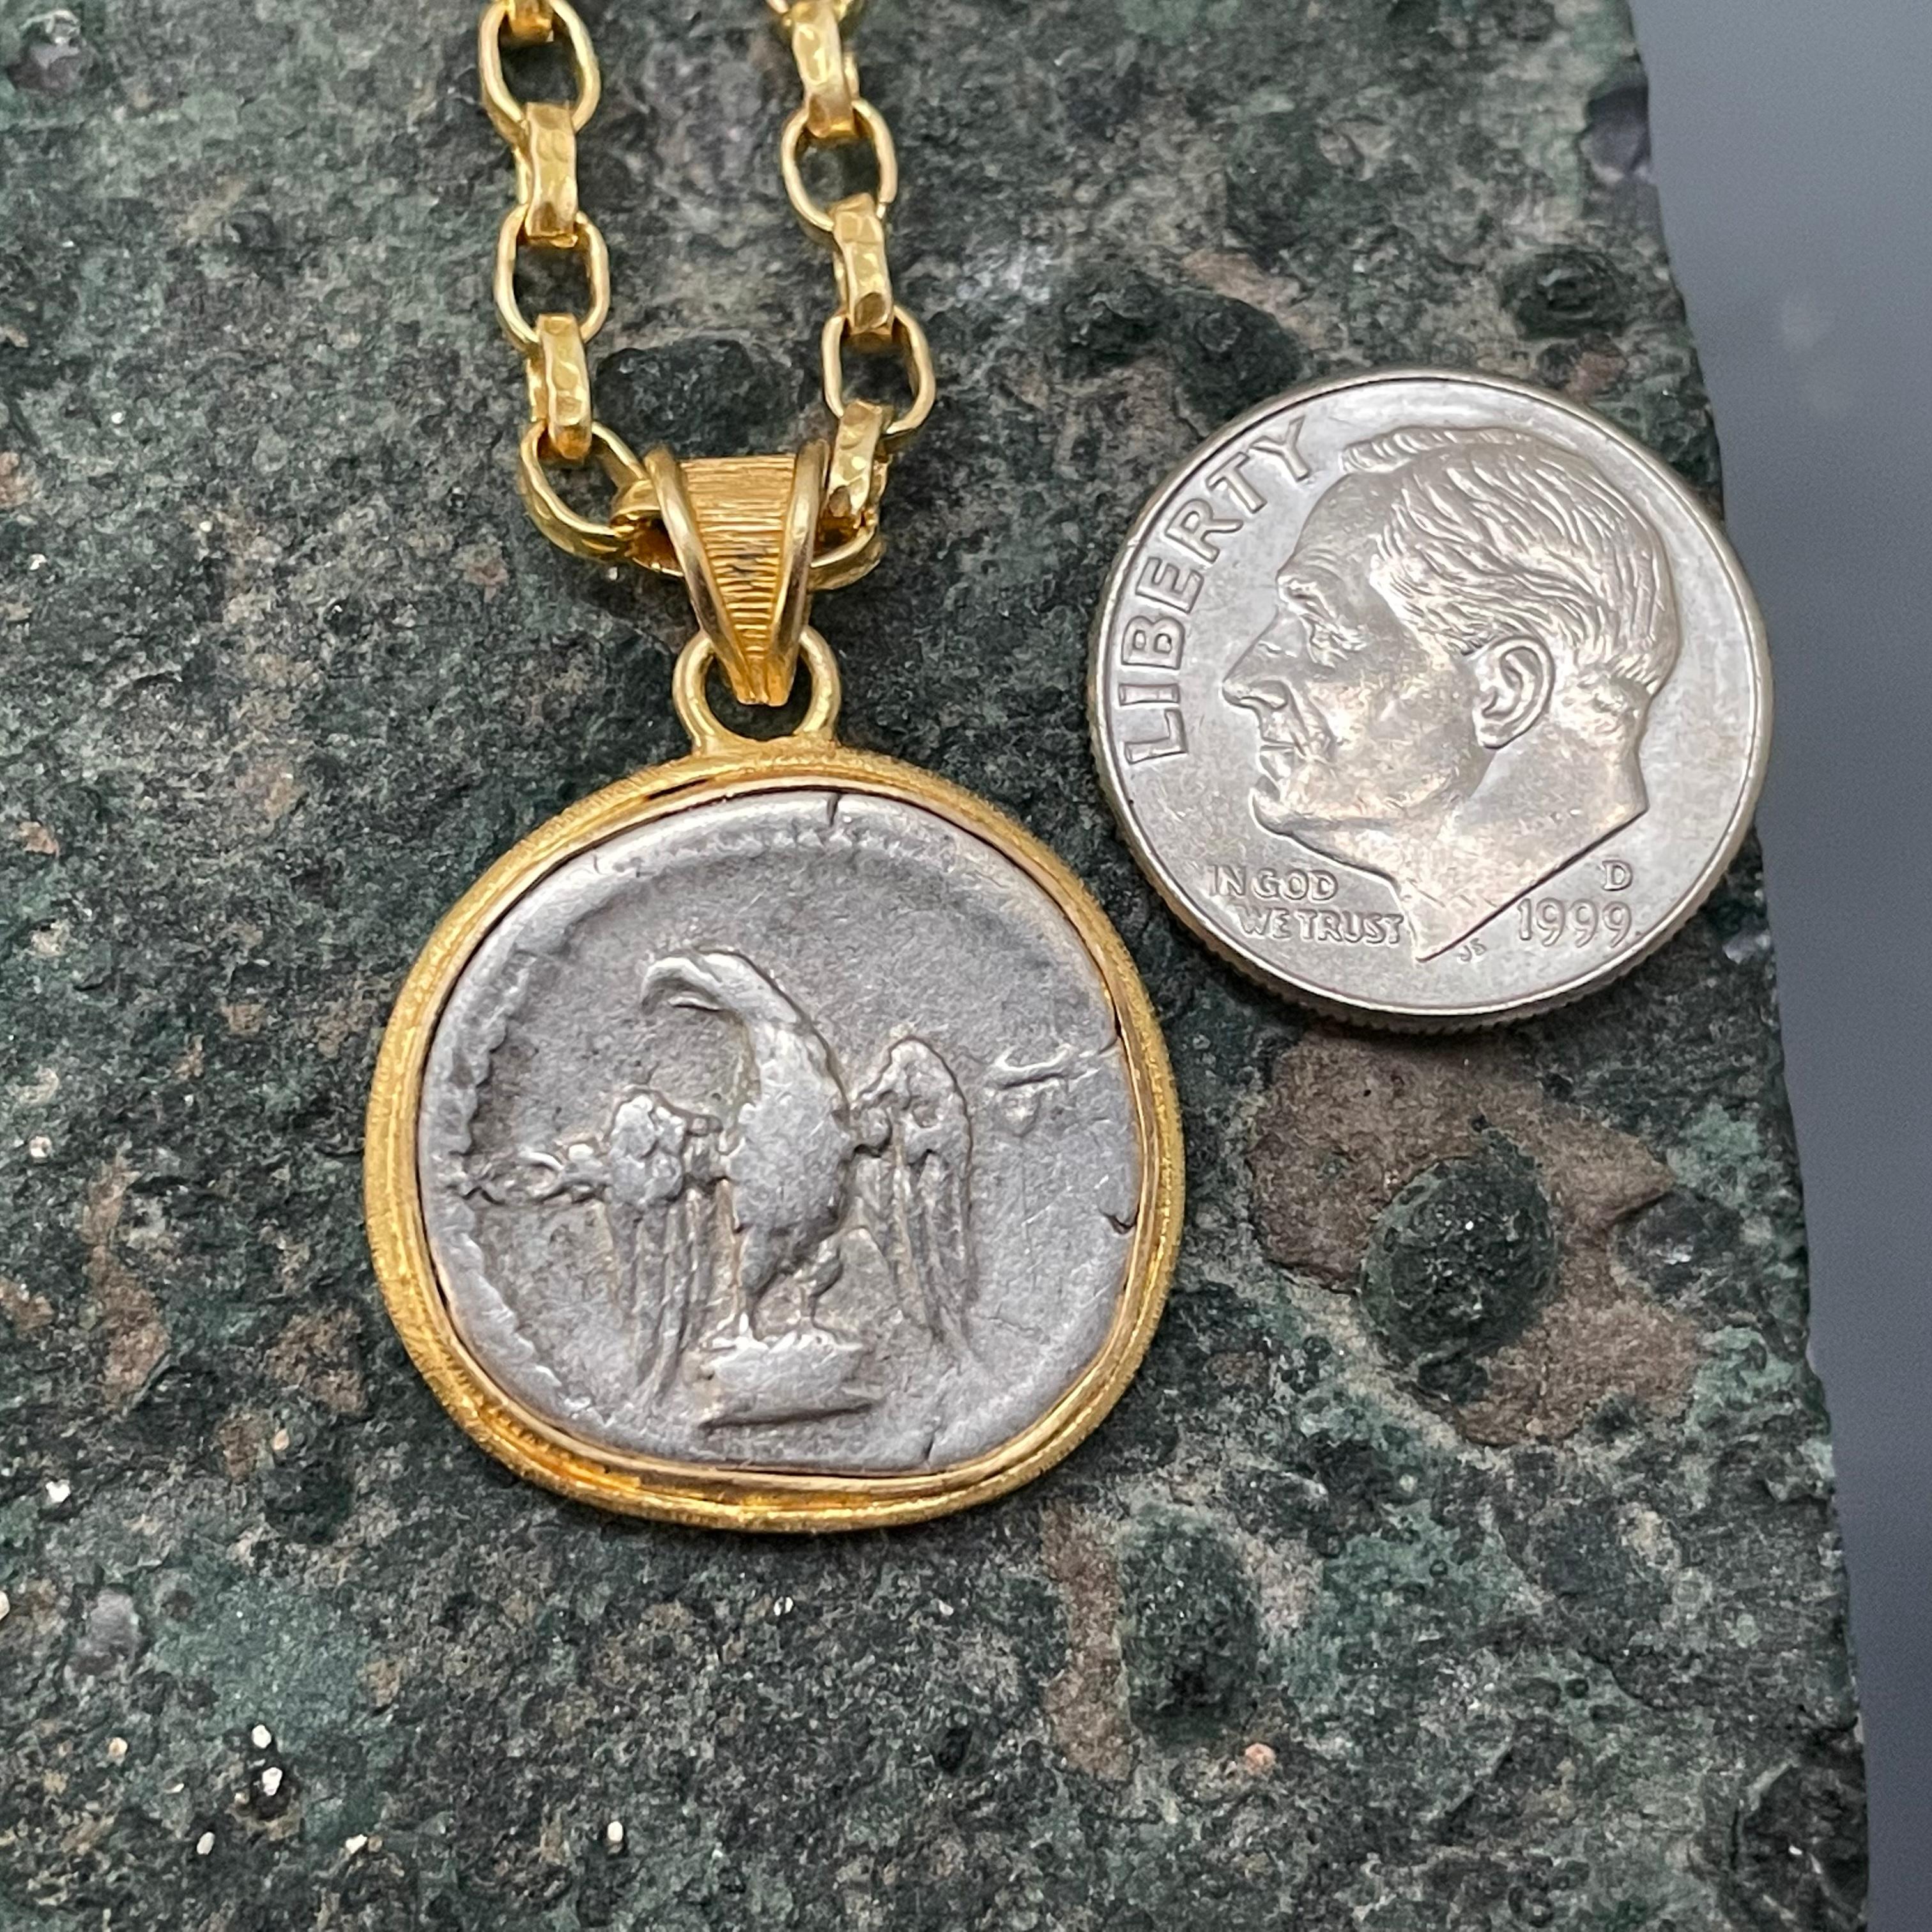 An authentic silver denarius coin with a depiction of the Roman Imperial eagle standing, minted during the realm of the emperor Vespasian in 69-79 AD, is set in a simple matte-finish line textured handmade bezel designed by Steven Battelle.  The